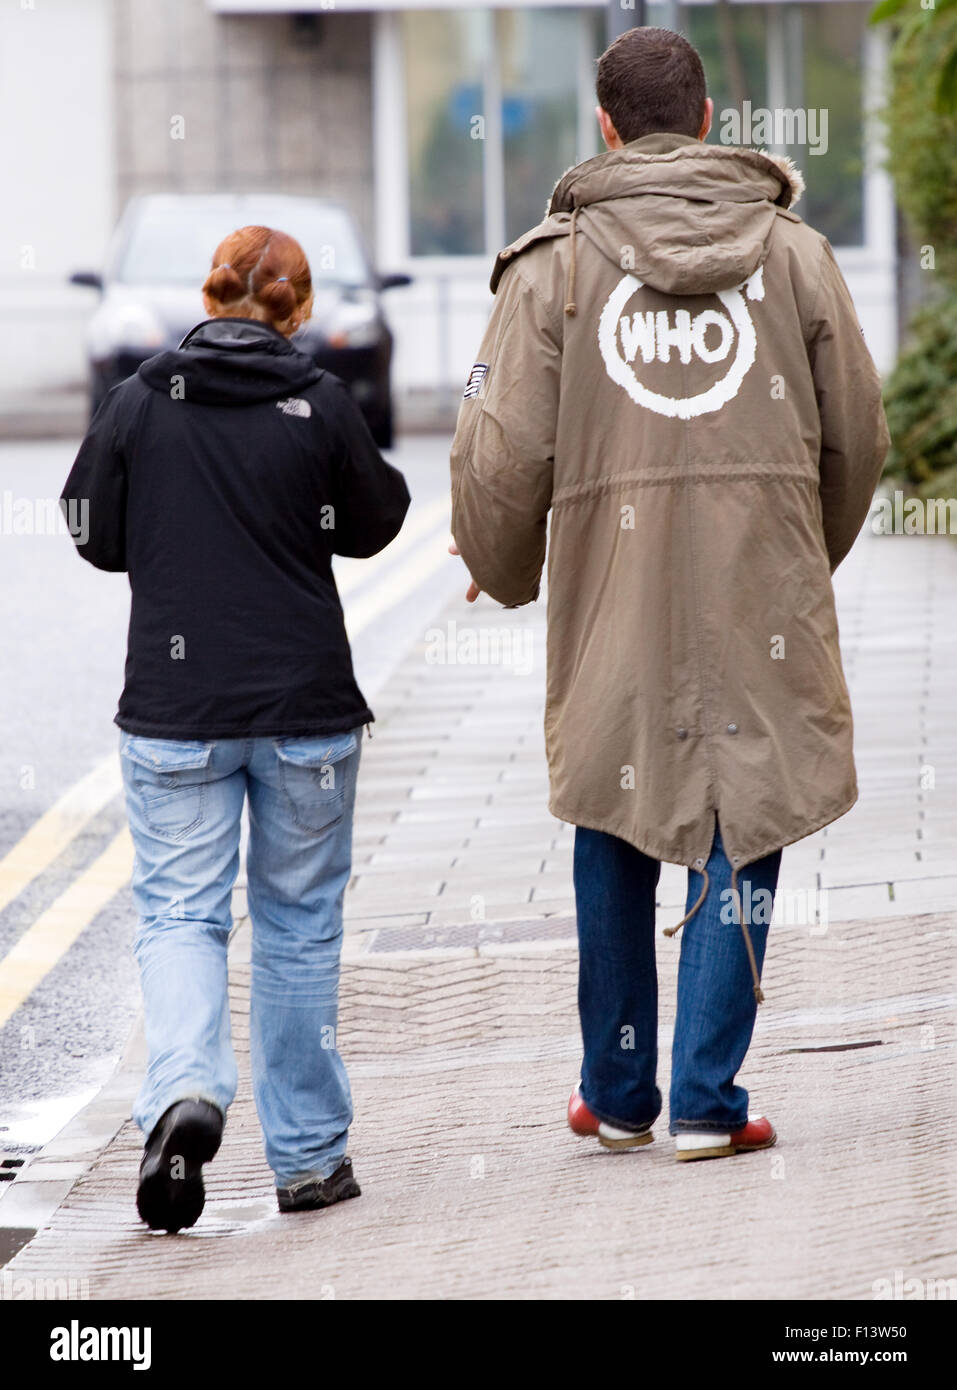 A mod, dressd in 60's mod clothing walking along a street. He has a logo  for the band, The Who, painted on the back of a Parka coat Stock Photo -  Alamy